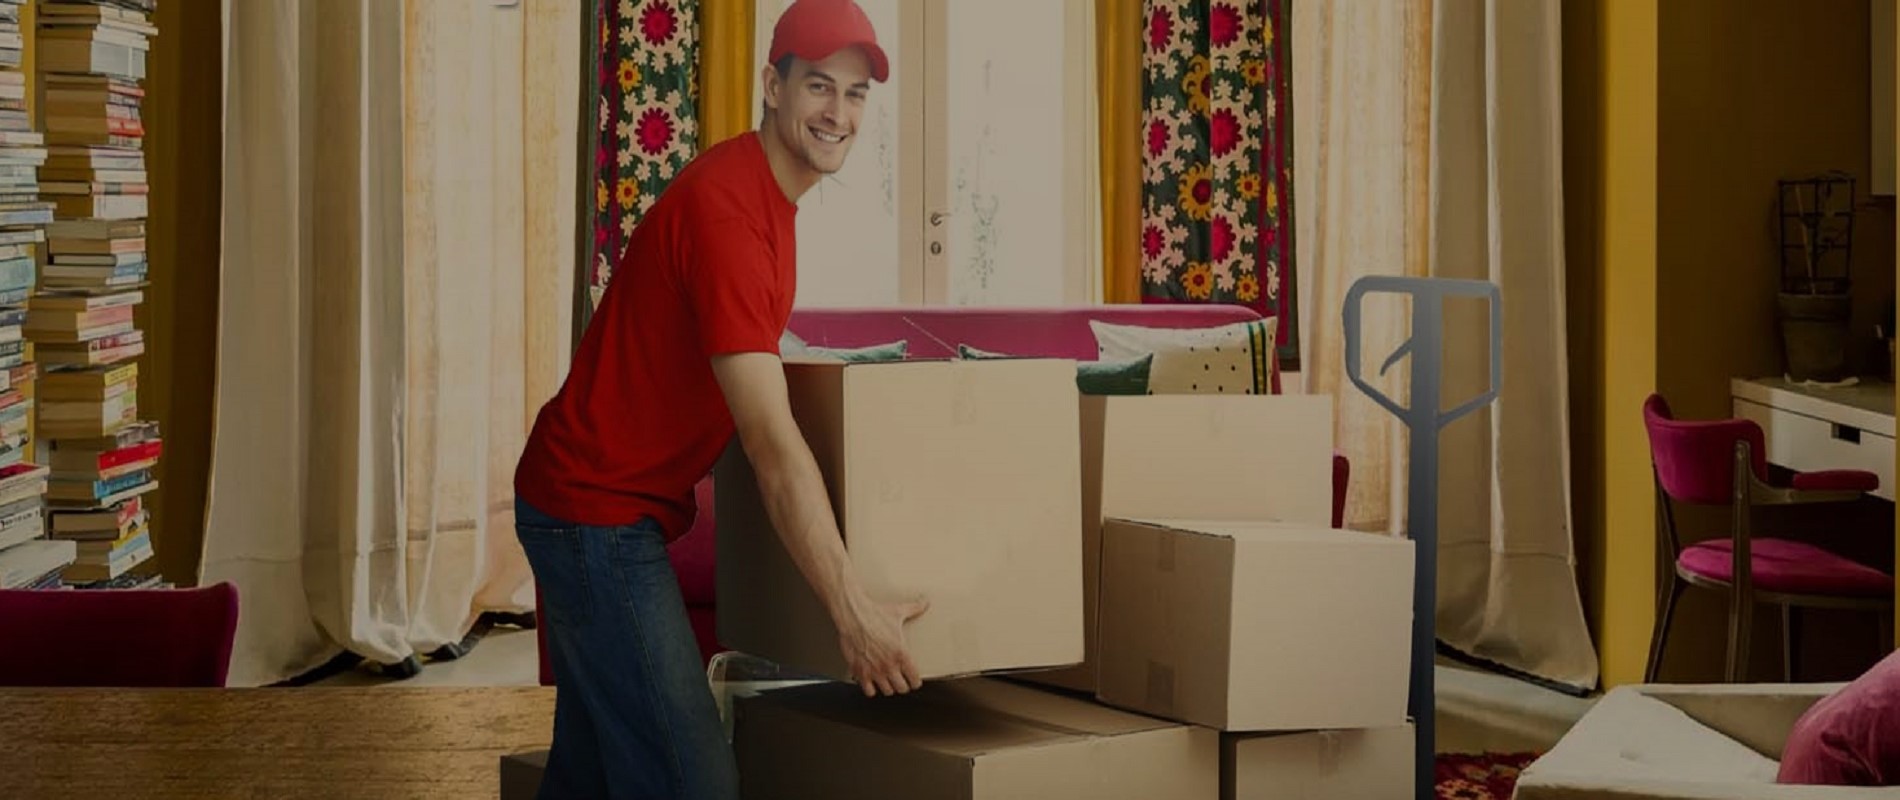 Packers and Movers Indore